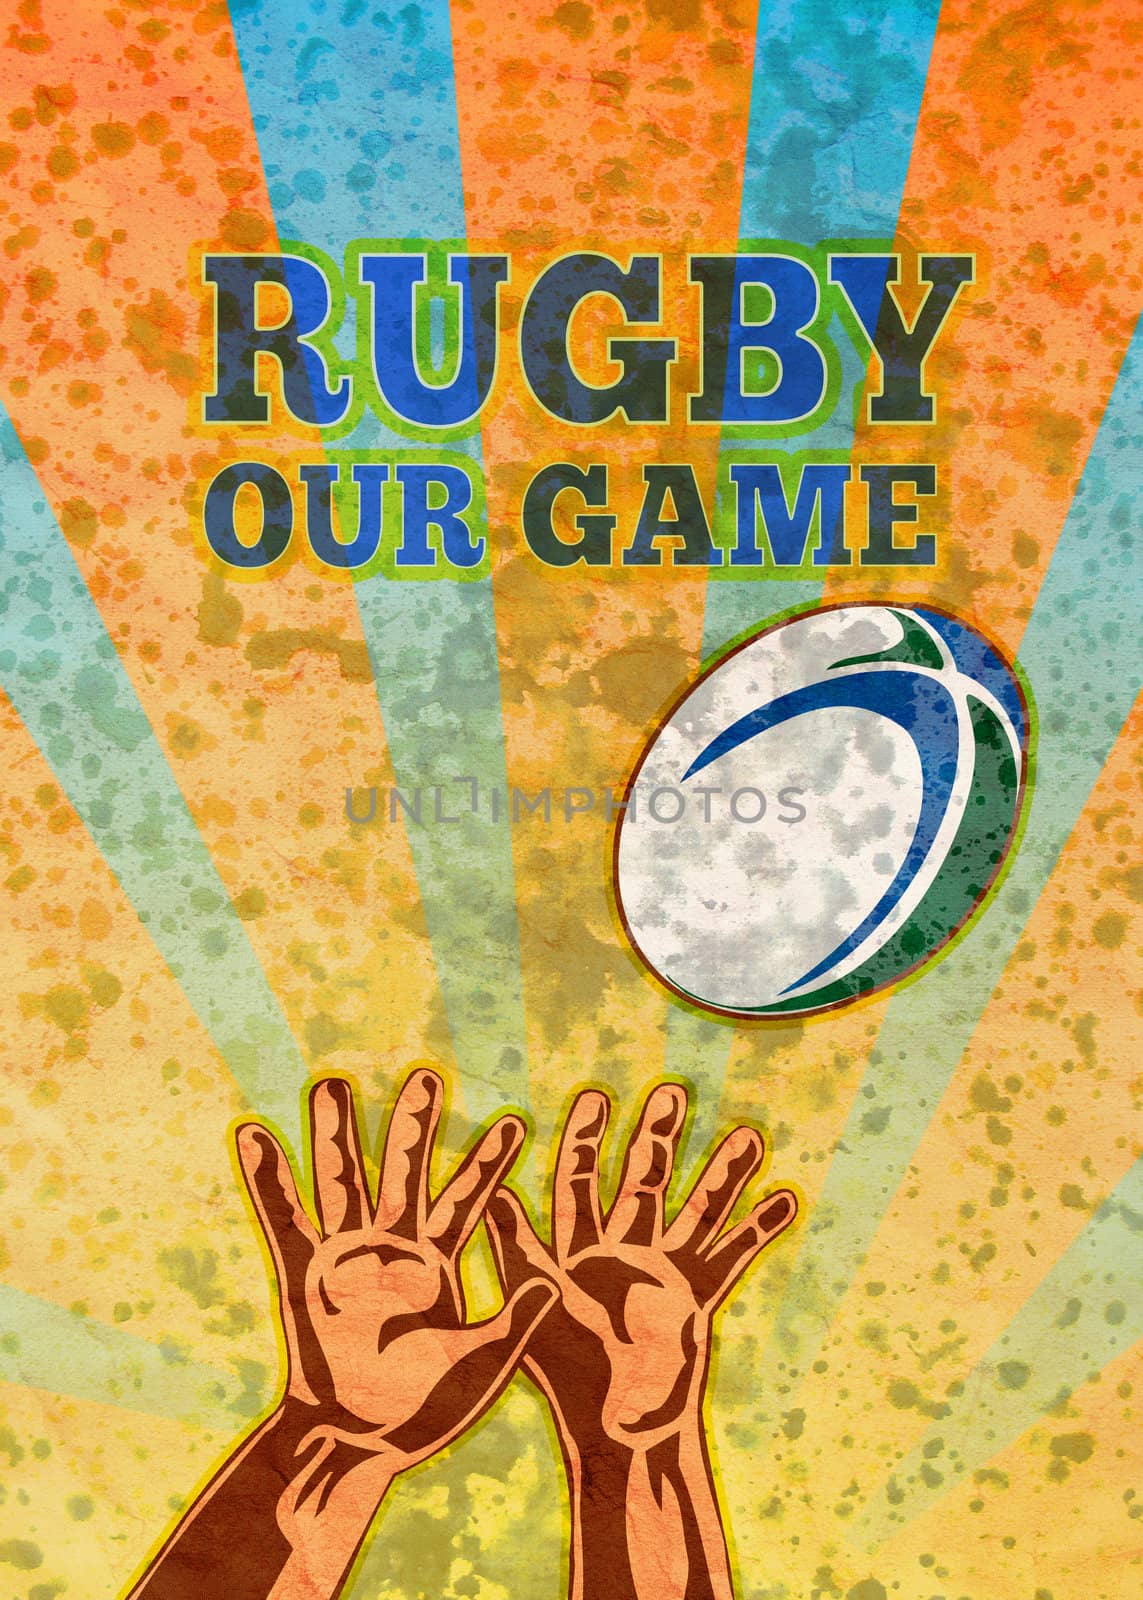 poster illustration of a rugby player hands catching ball with grunge texture background with words "Rugby our game"